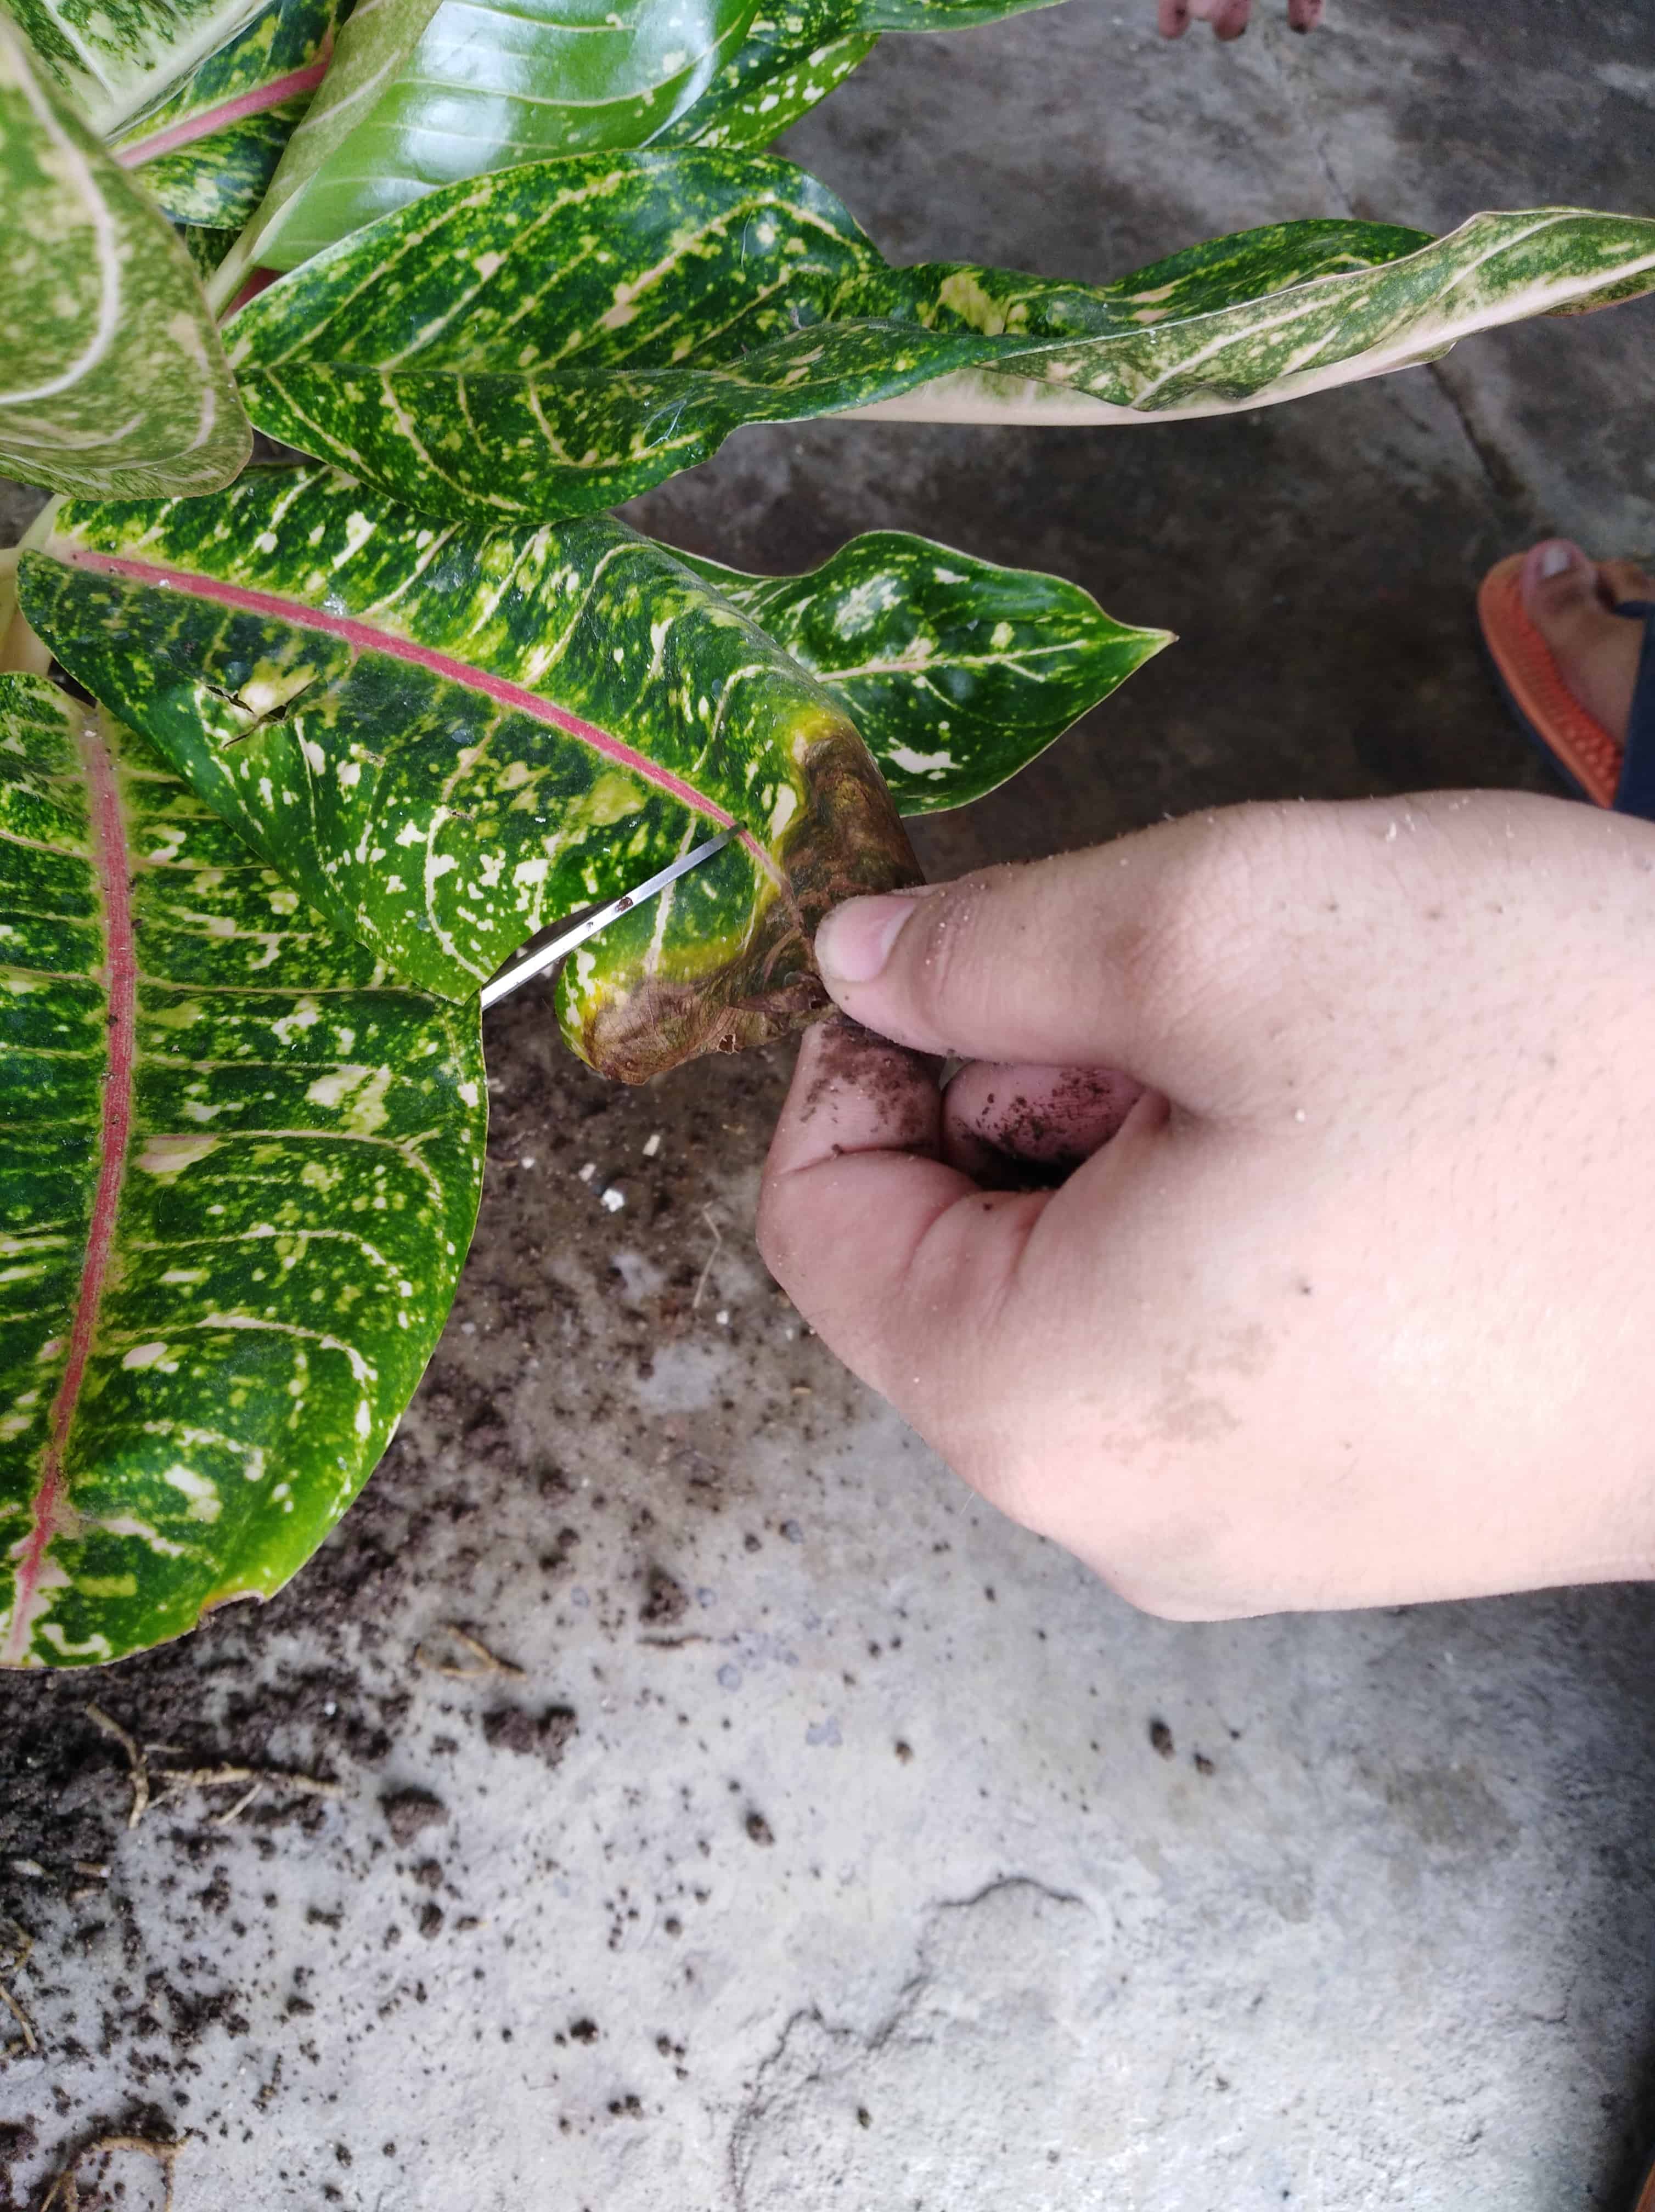 Cutting off brown, damaged parts of the plant's leaves.